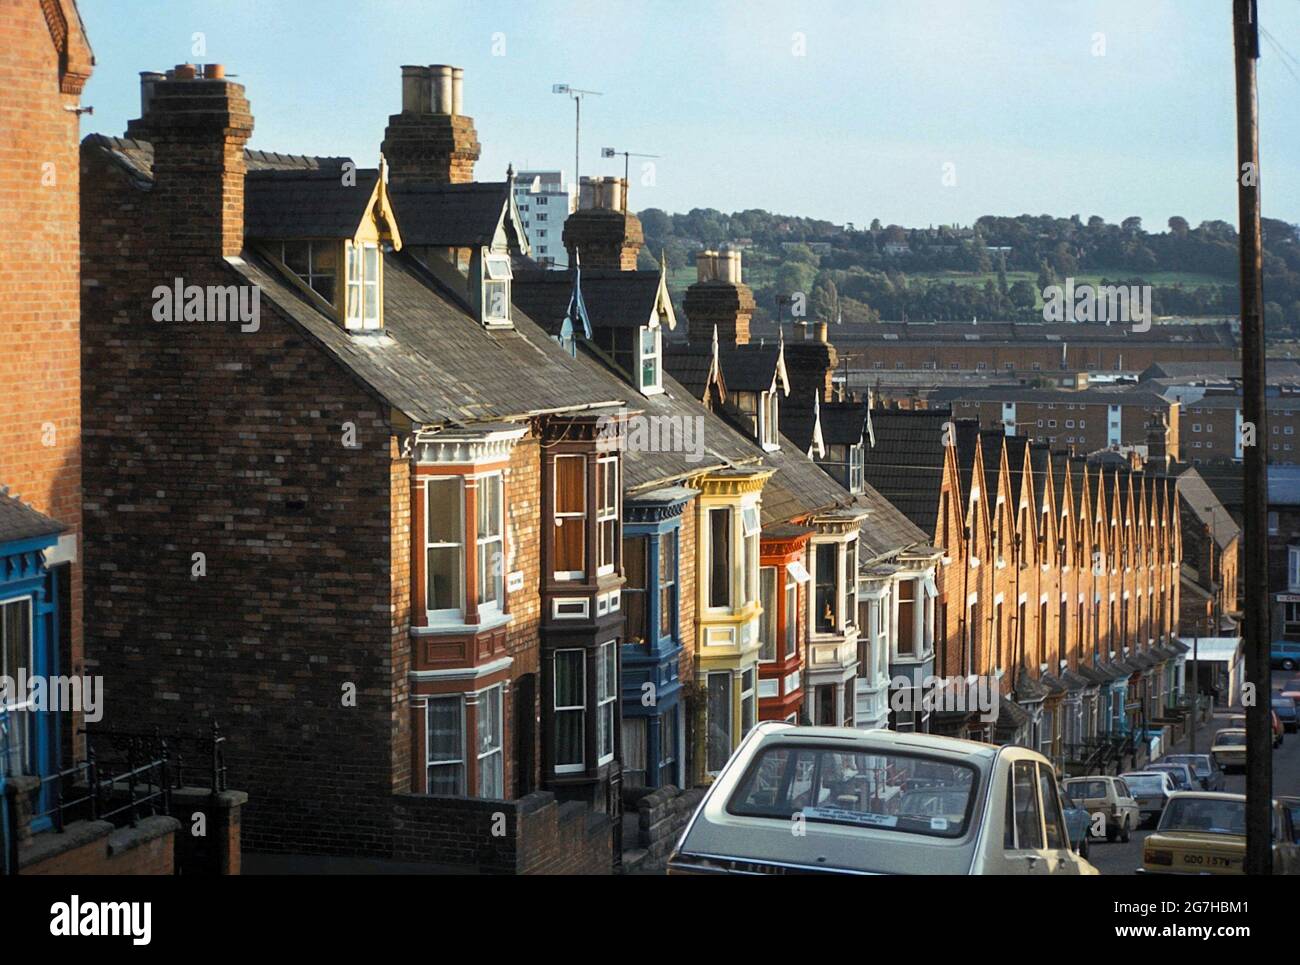 Looking down a street of old Victorian terrace houses on the hill. a Film photograph from the 1980s Stock Photo